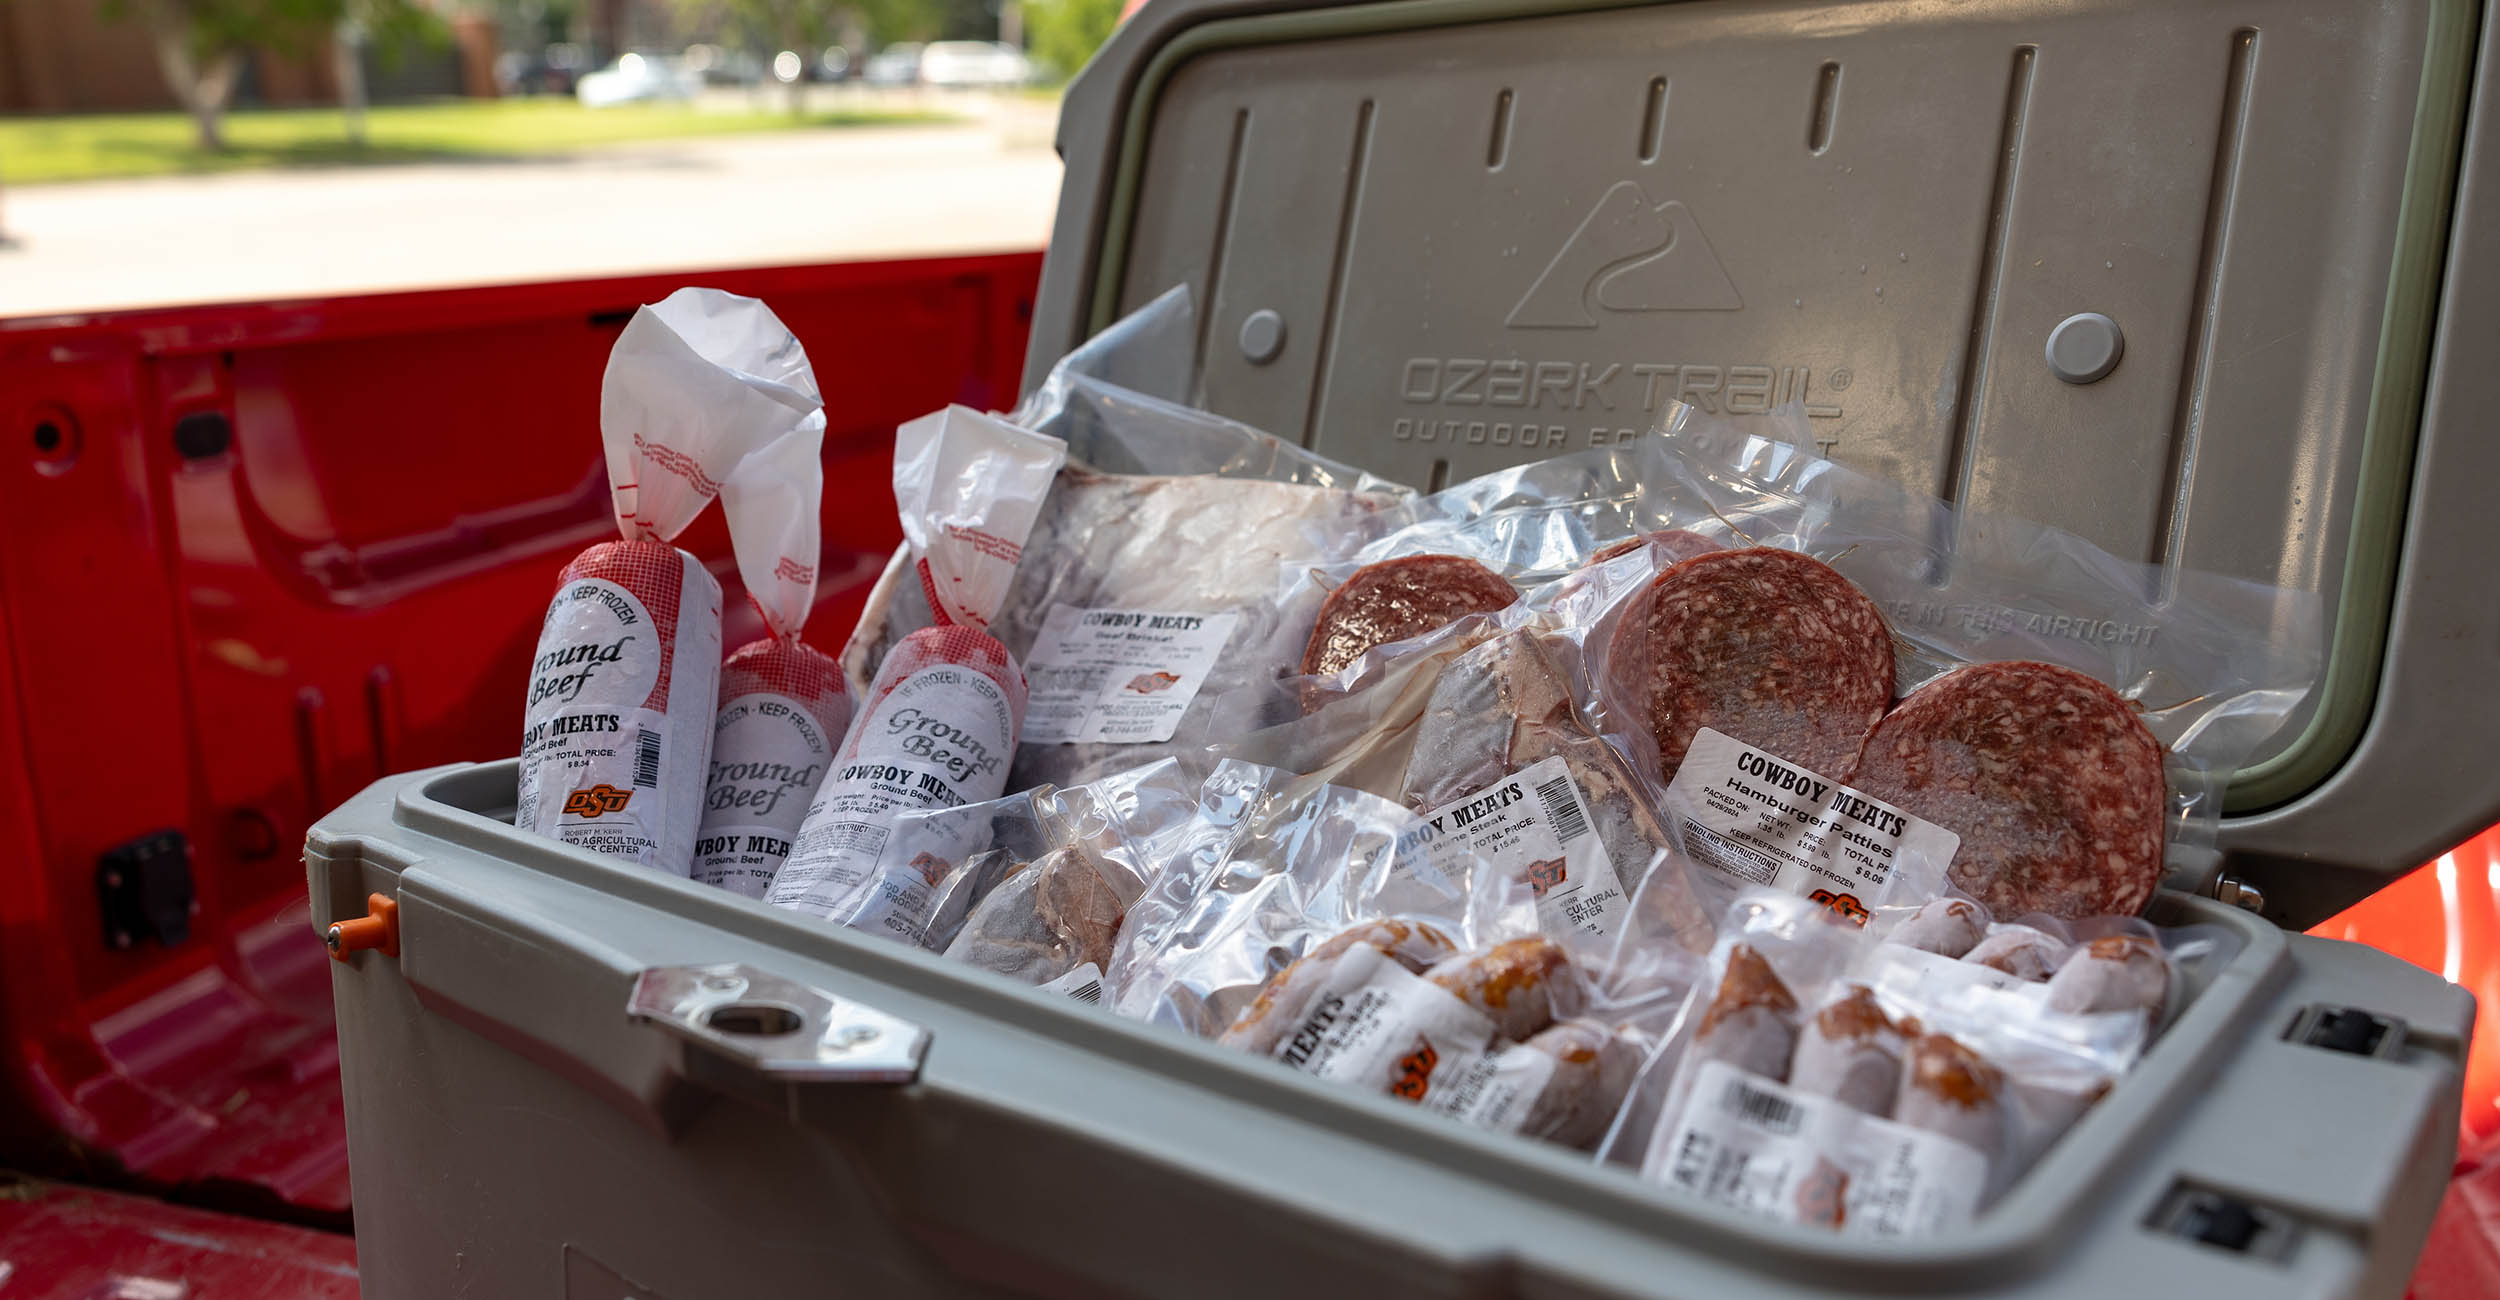 When packing foods in a cooler for a picnic or cookout, include plenty of ice or frozen gel packs to keep foods at 40 F or below. Keep drinks in a separate cooler. (Photo by Mitchell Alcala, OSU Agriculture)